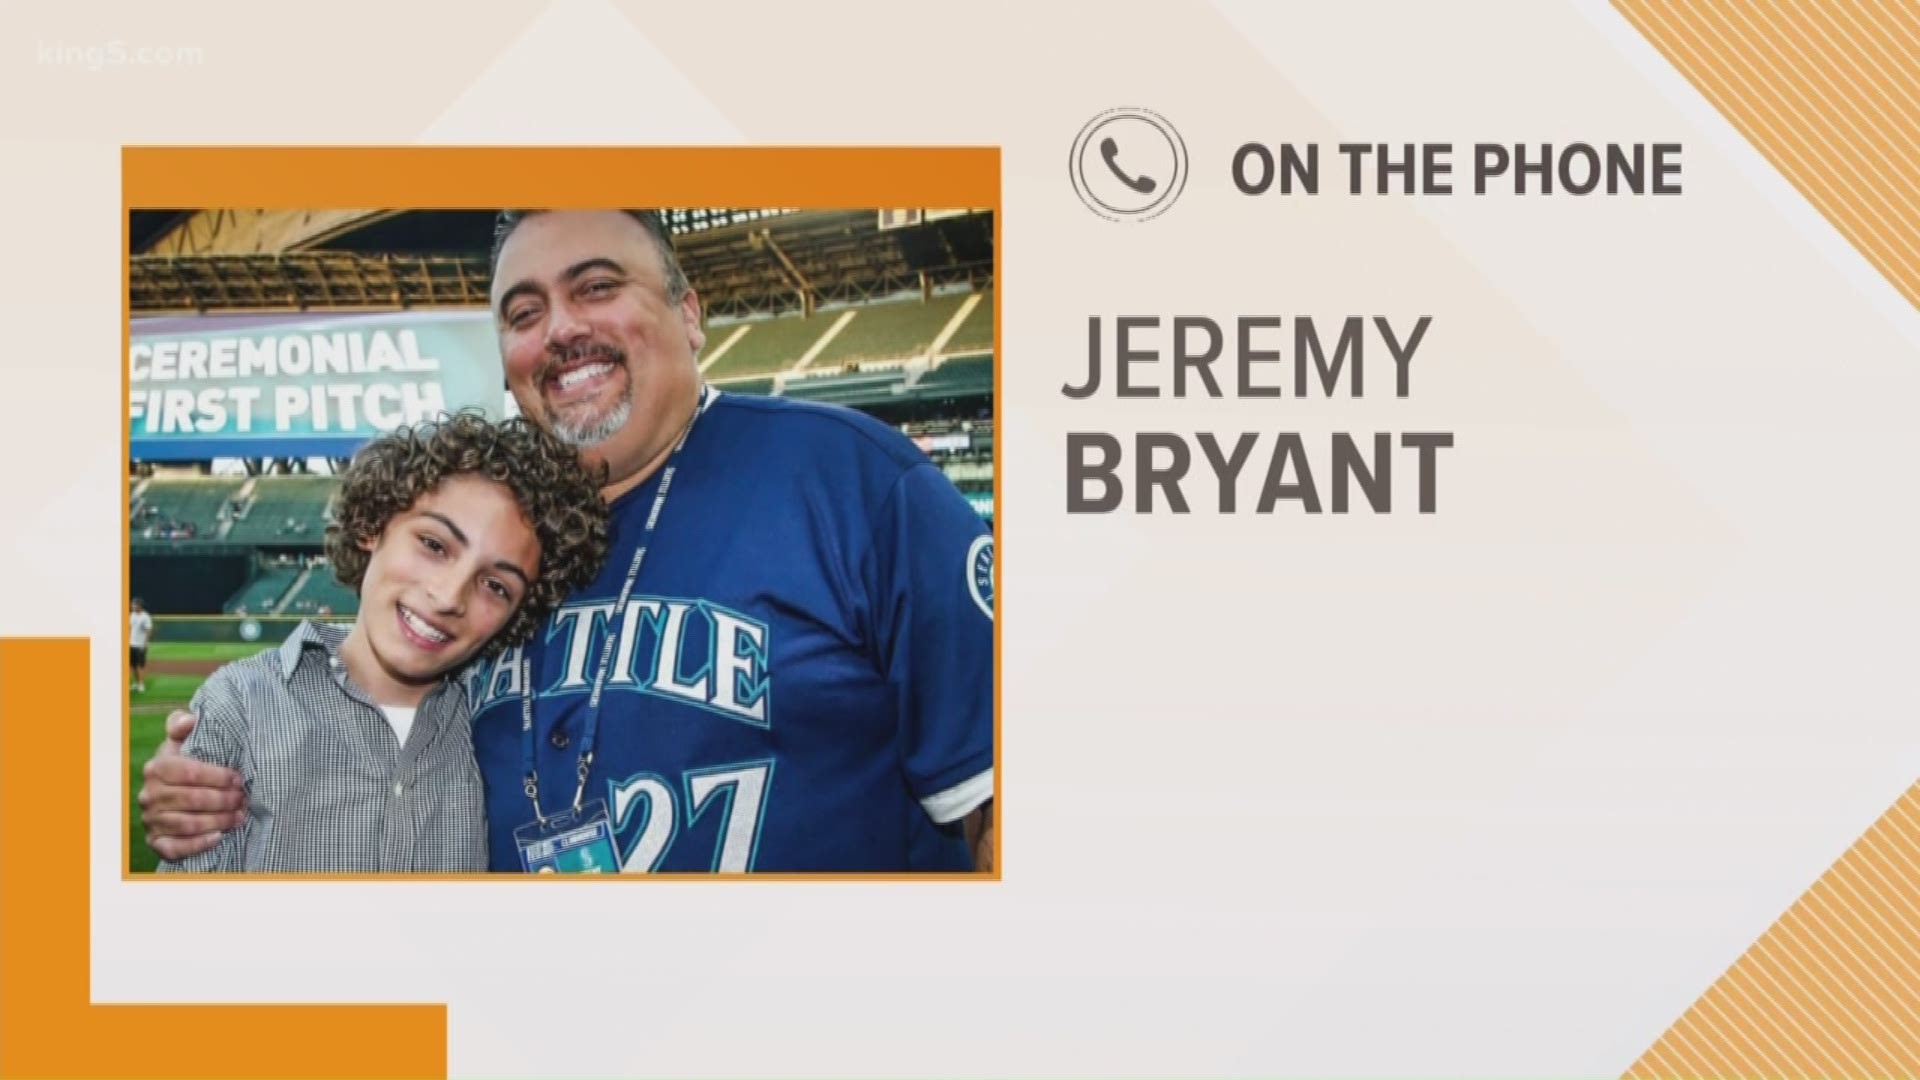 Jeremy Bryant, Benicio Bryant's dad, talks about what he hopes Benicio will take away from his run on America's Got Talent.